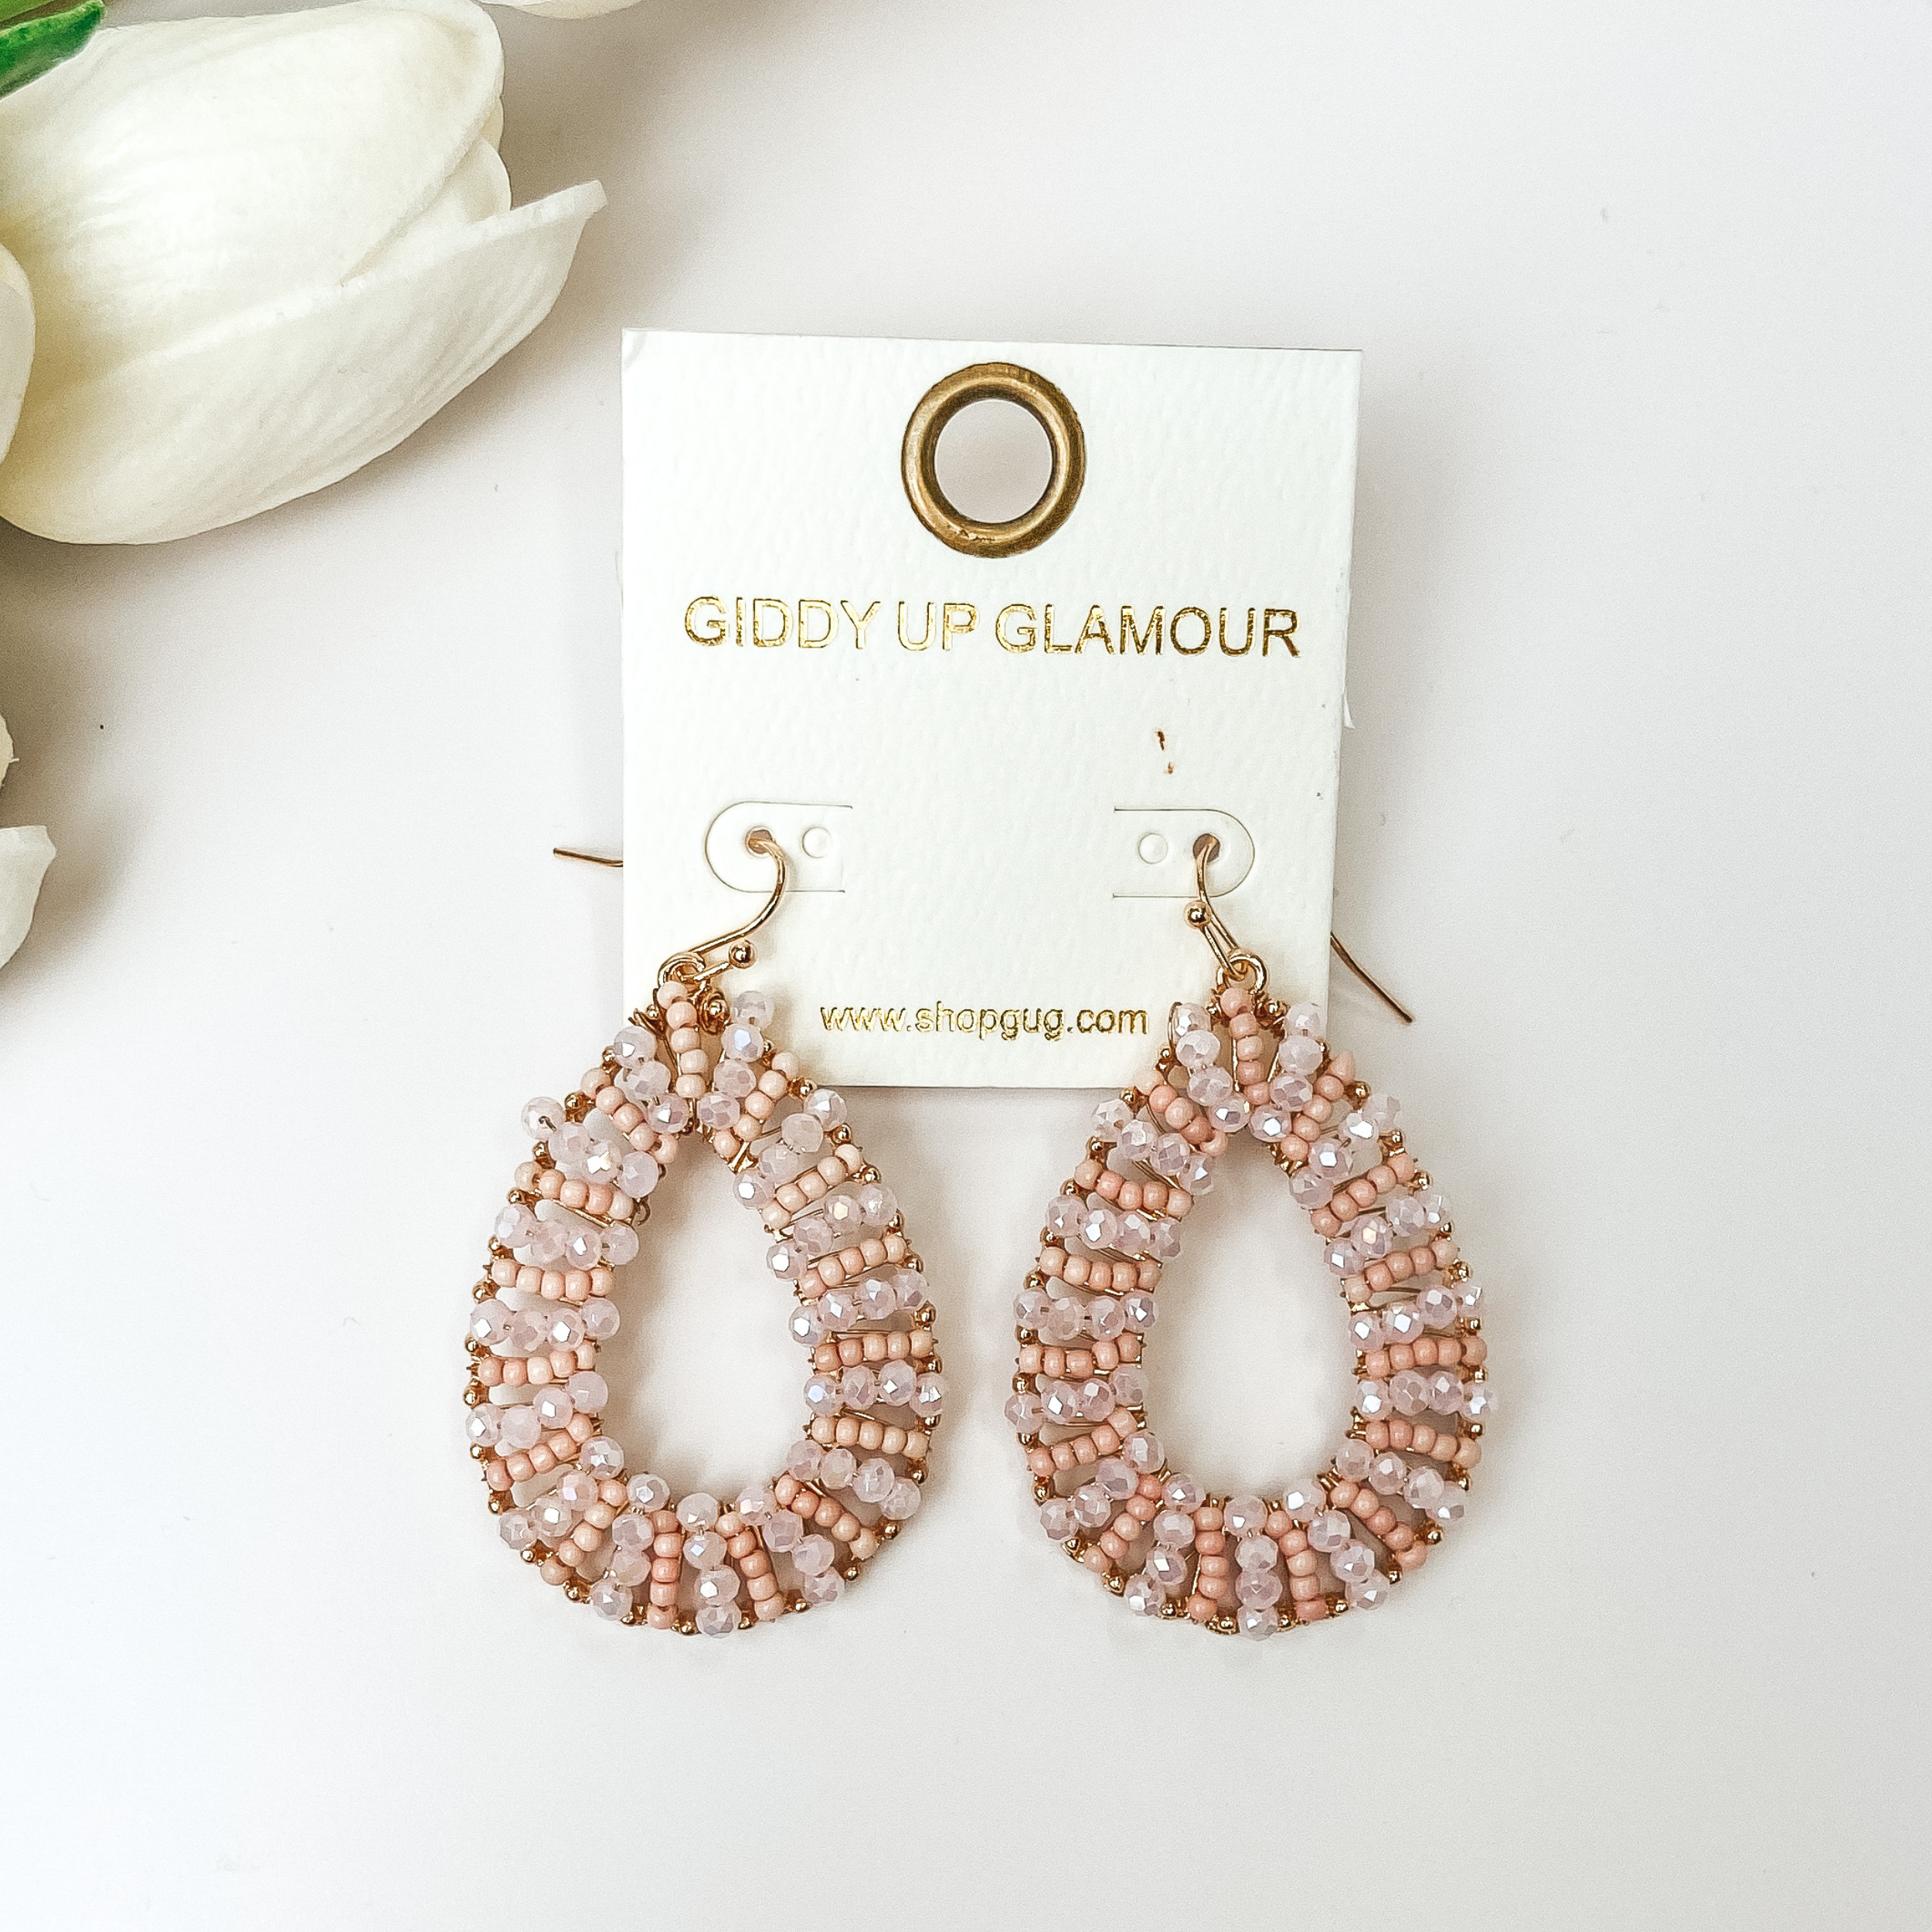 Light pink and gold teardrop earrings on a white background with white flowers.